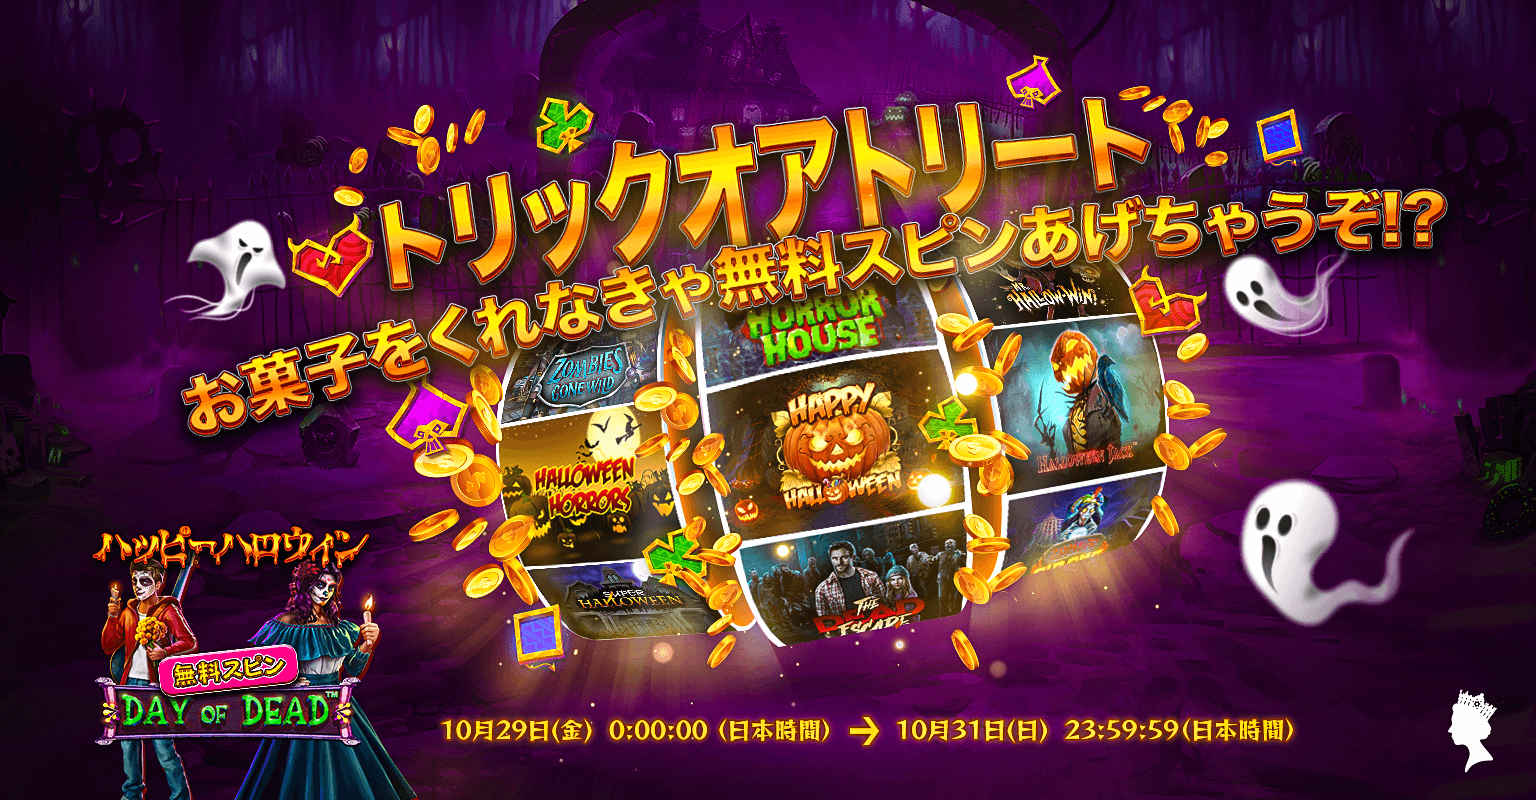 During the period, only those who have deposited $100 or more will receive 30 free spins when they say "Happy Halloween" to the live chat!